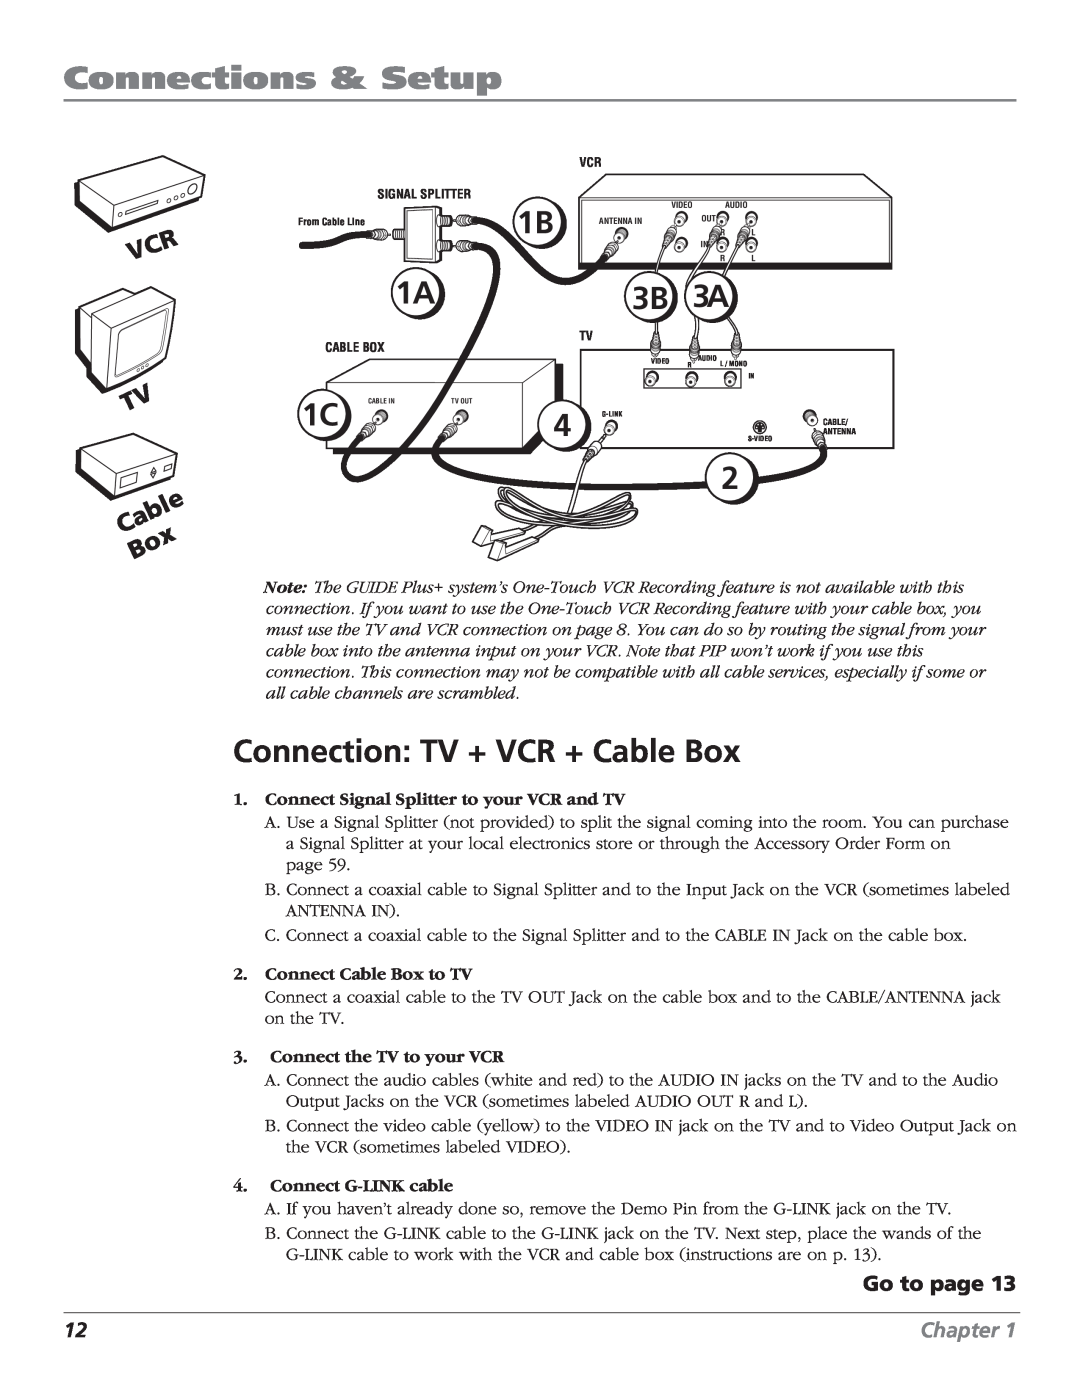 RCA F27669 Connection TV + VCR + Cable Box, Connections & Setup, TV Cable Box, Go to page, Chapter, Connect G-LINK cable 